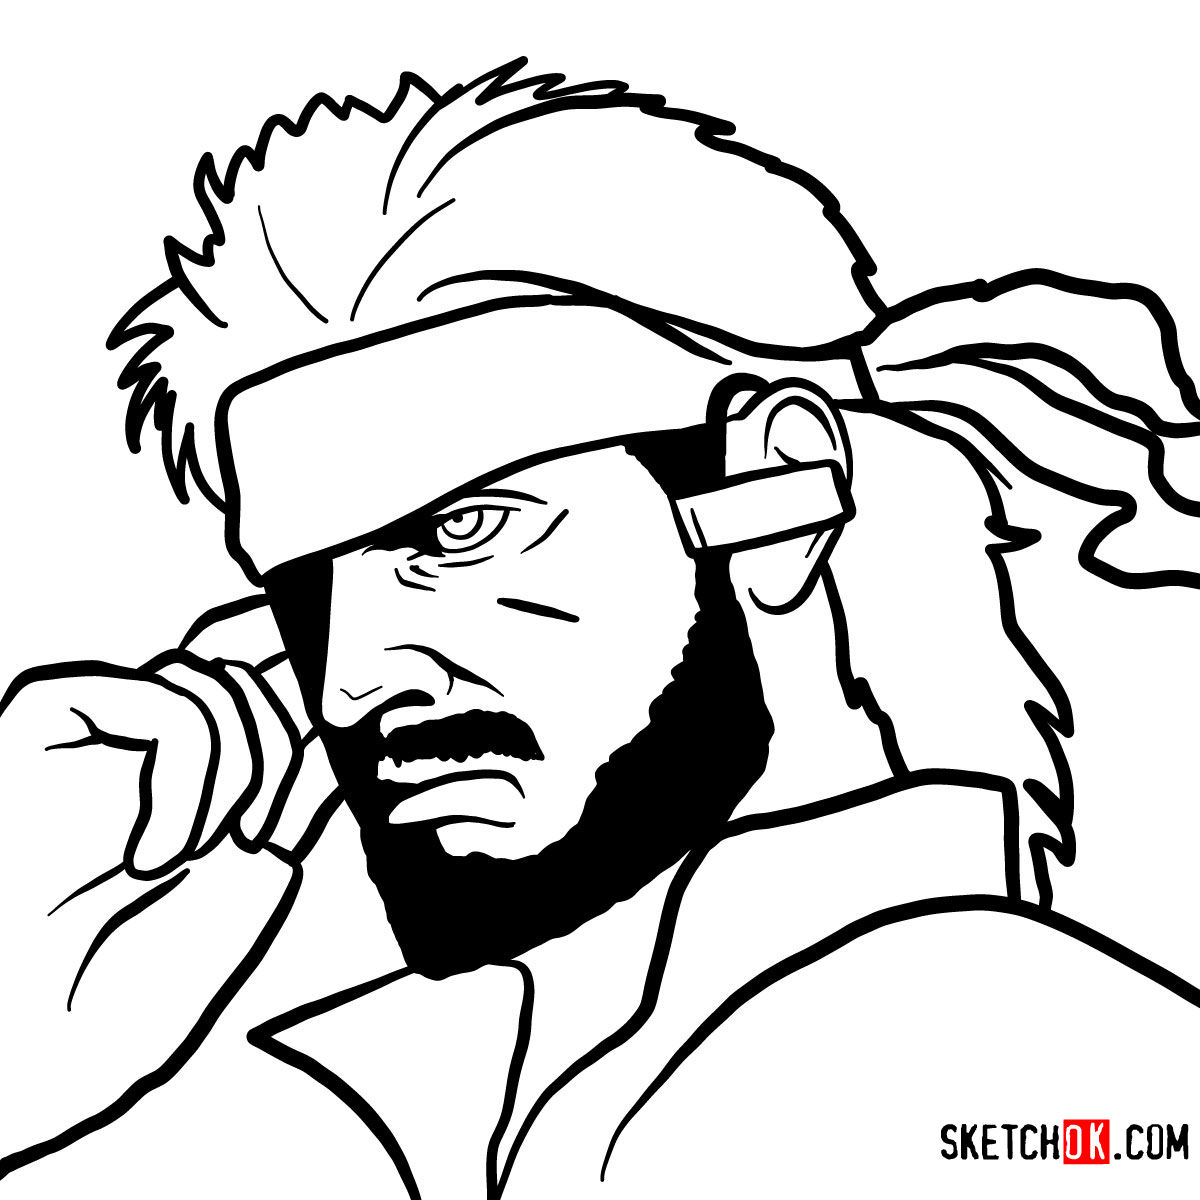 How to draw Venom Snake's face | Metal Gear Solid